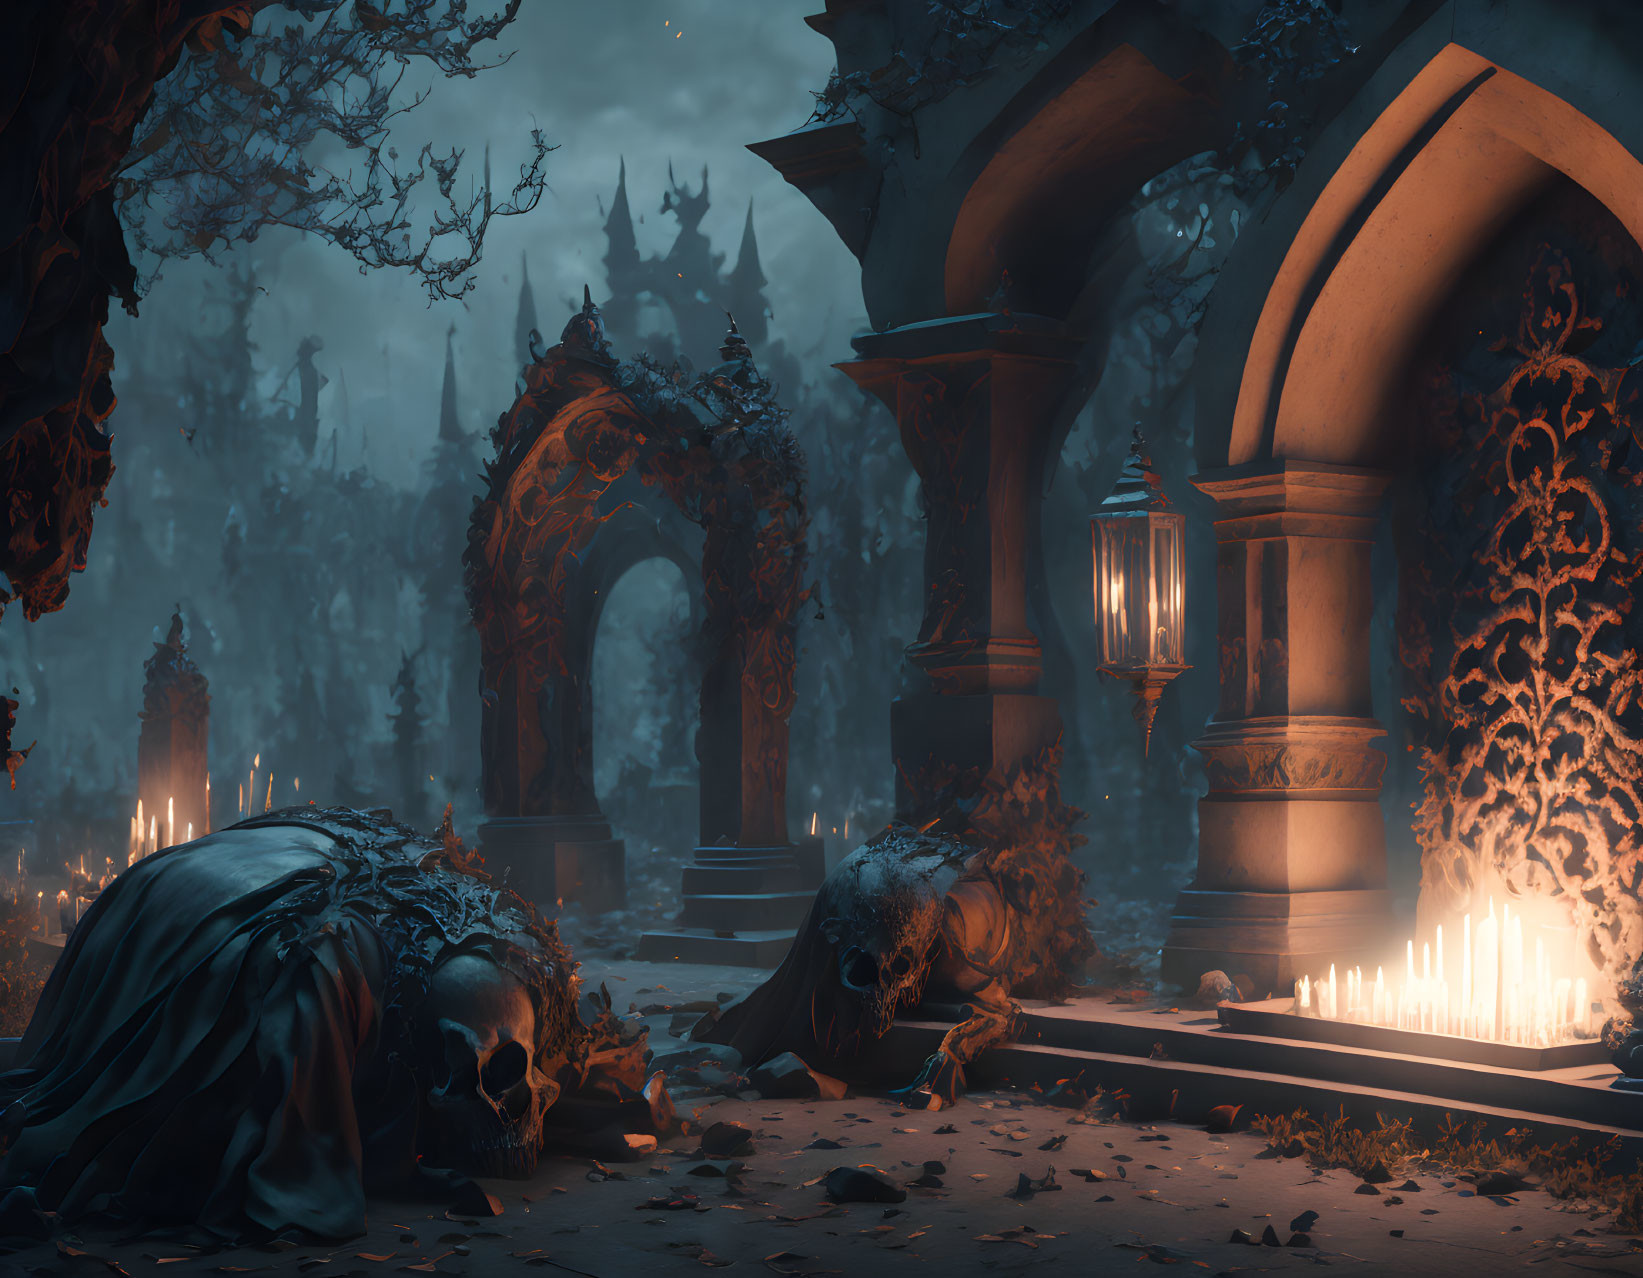 Spooky night scene with large skulls, ruins, candlelight, and misty forest